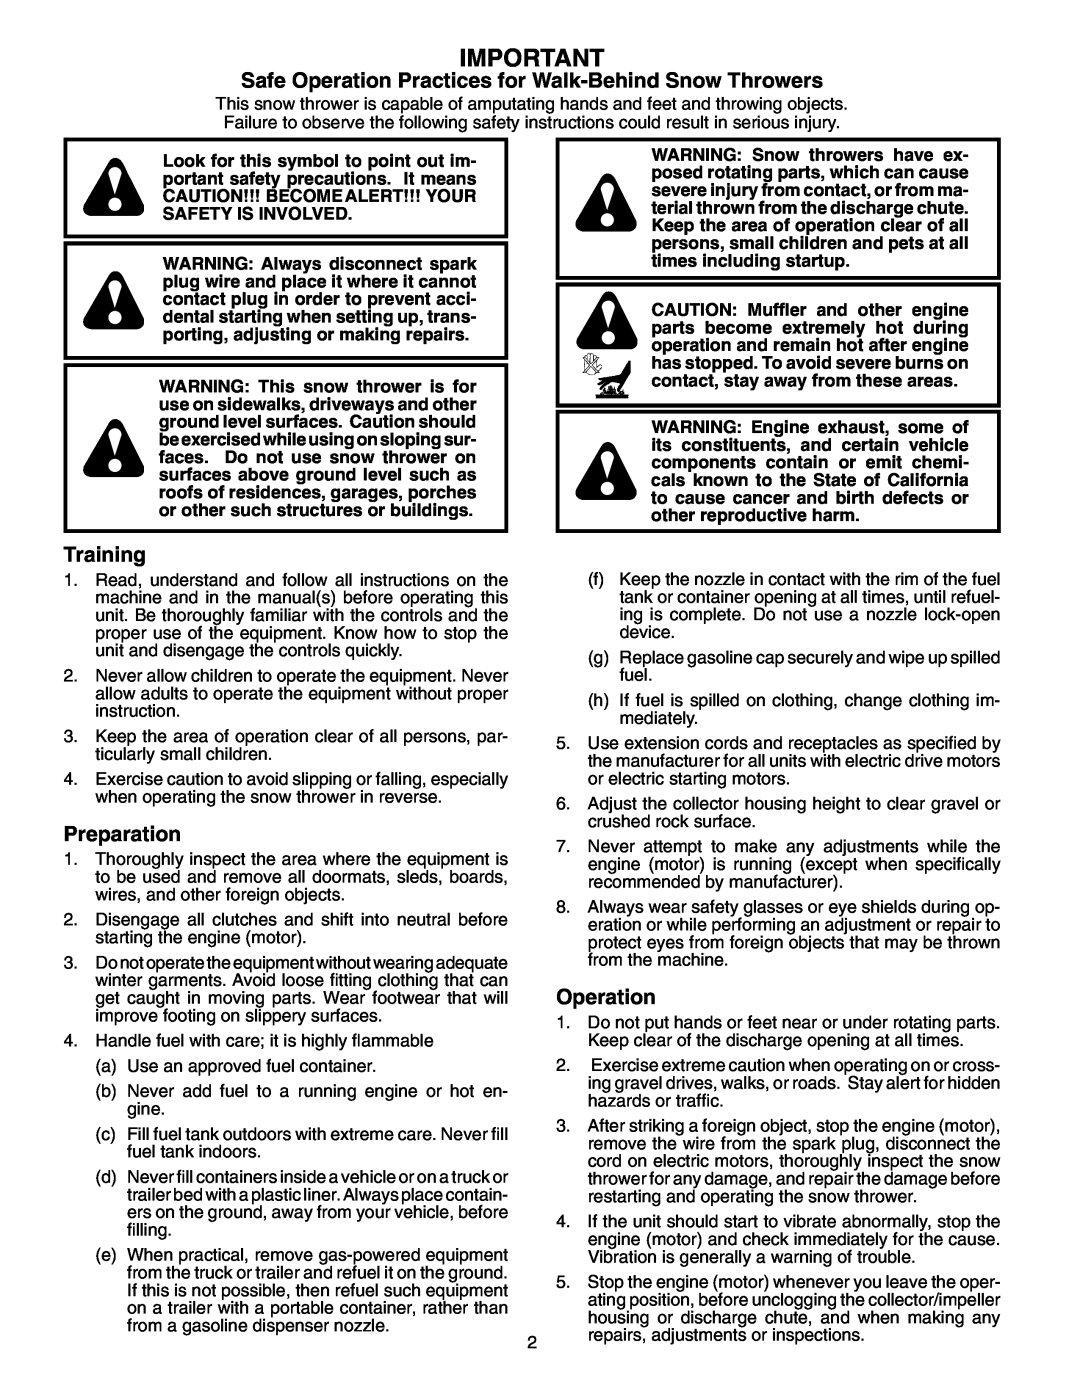 Poulan 96192000600, 199329 owner manual Safe Operation Practices for Walk-Behind Snow Throwers, Training, Preparation 